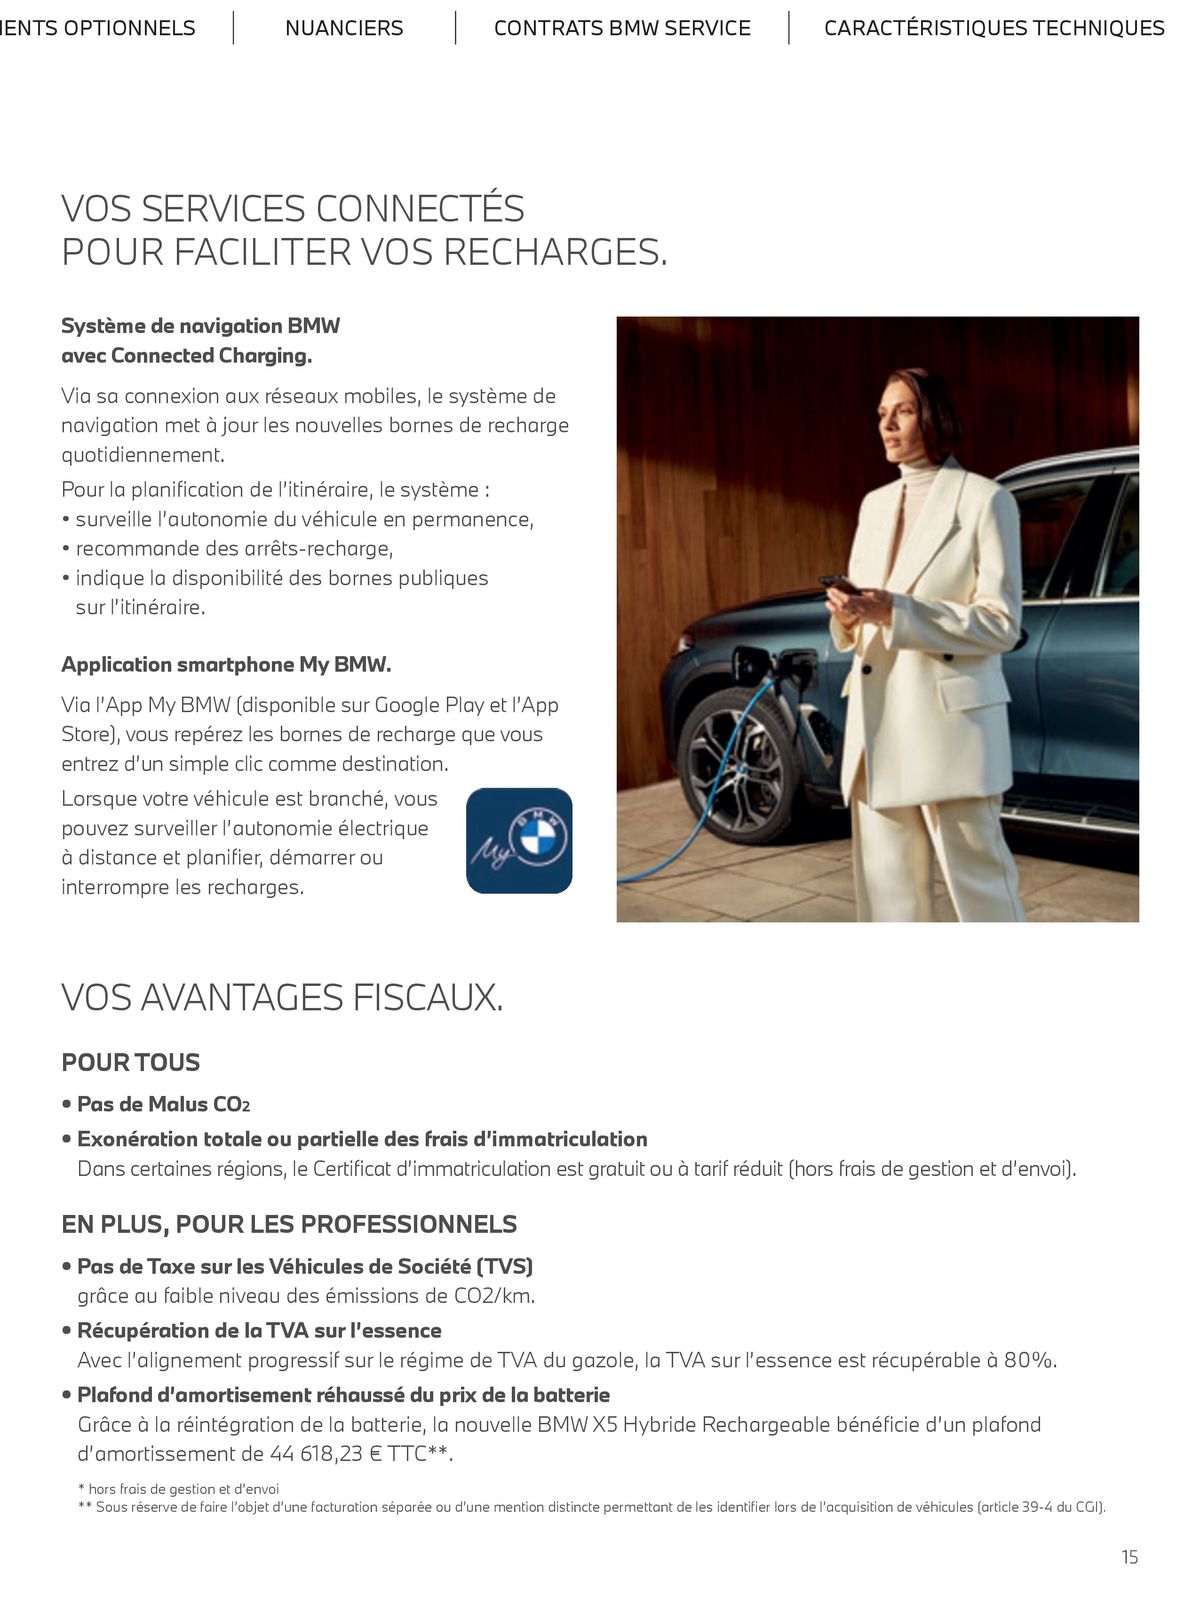 Catalogue The new X5, page 00015